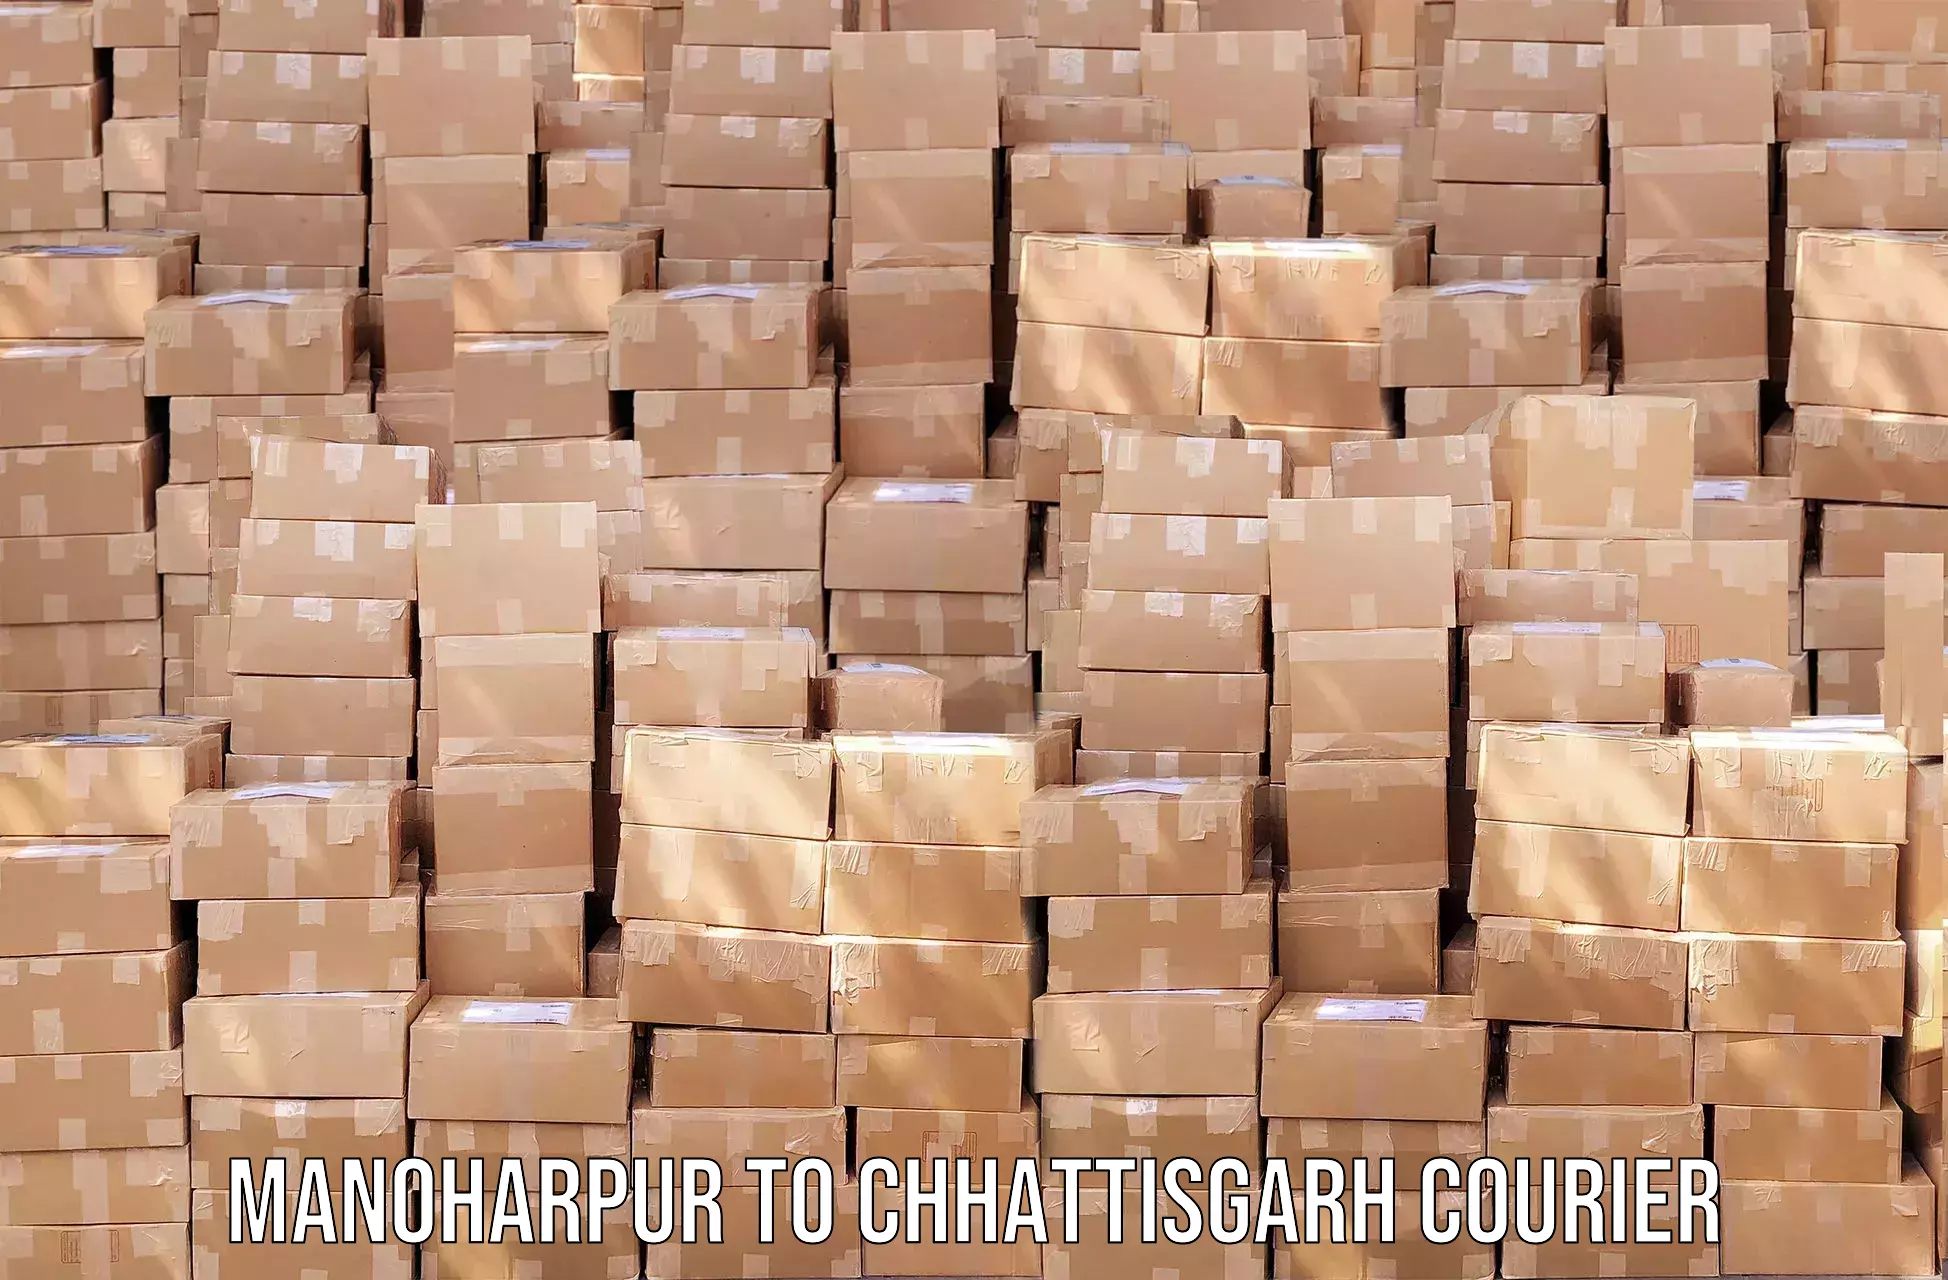 Next-day delivery options Manoharpur to Bastar